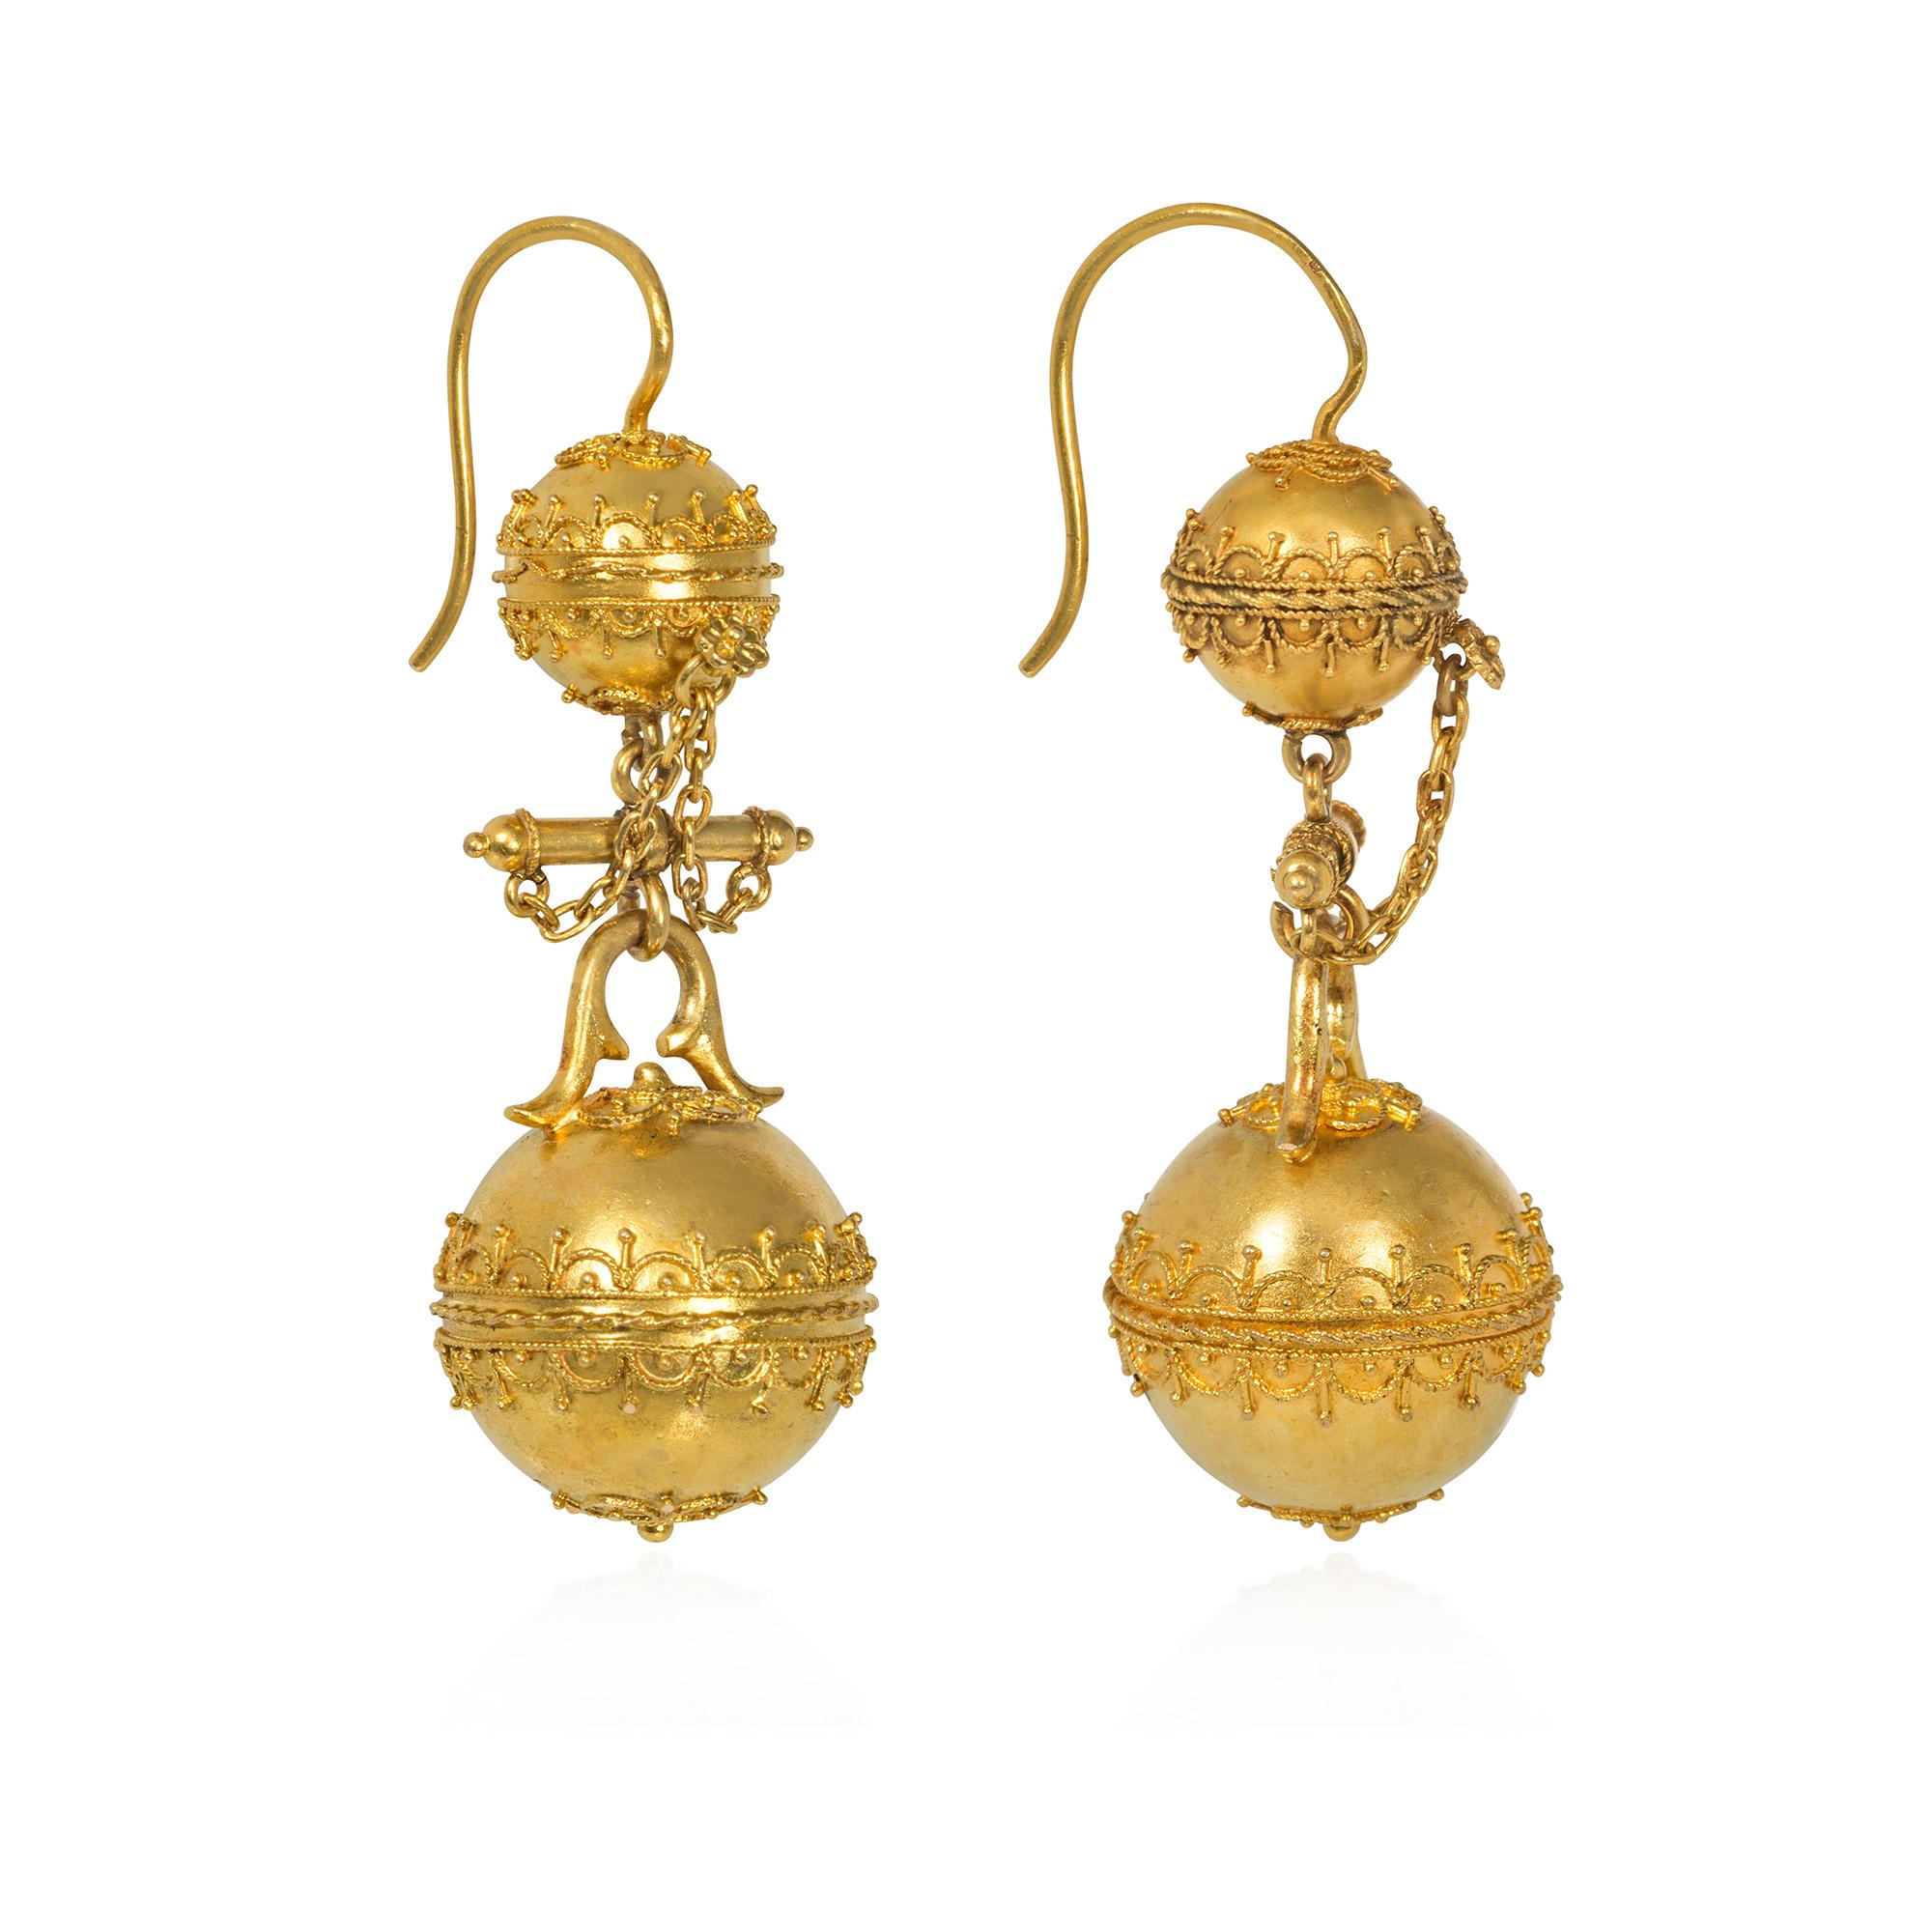 A pair of antique Victorian period gold earrings in the Etruscan Revival style, comprised of gold beads with applied wirework and granulation suspending from similar bead surmounts with a baton spacer and chain decoration, in 14k.  Approximately